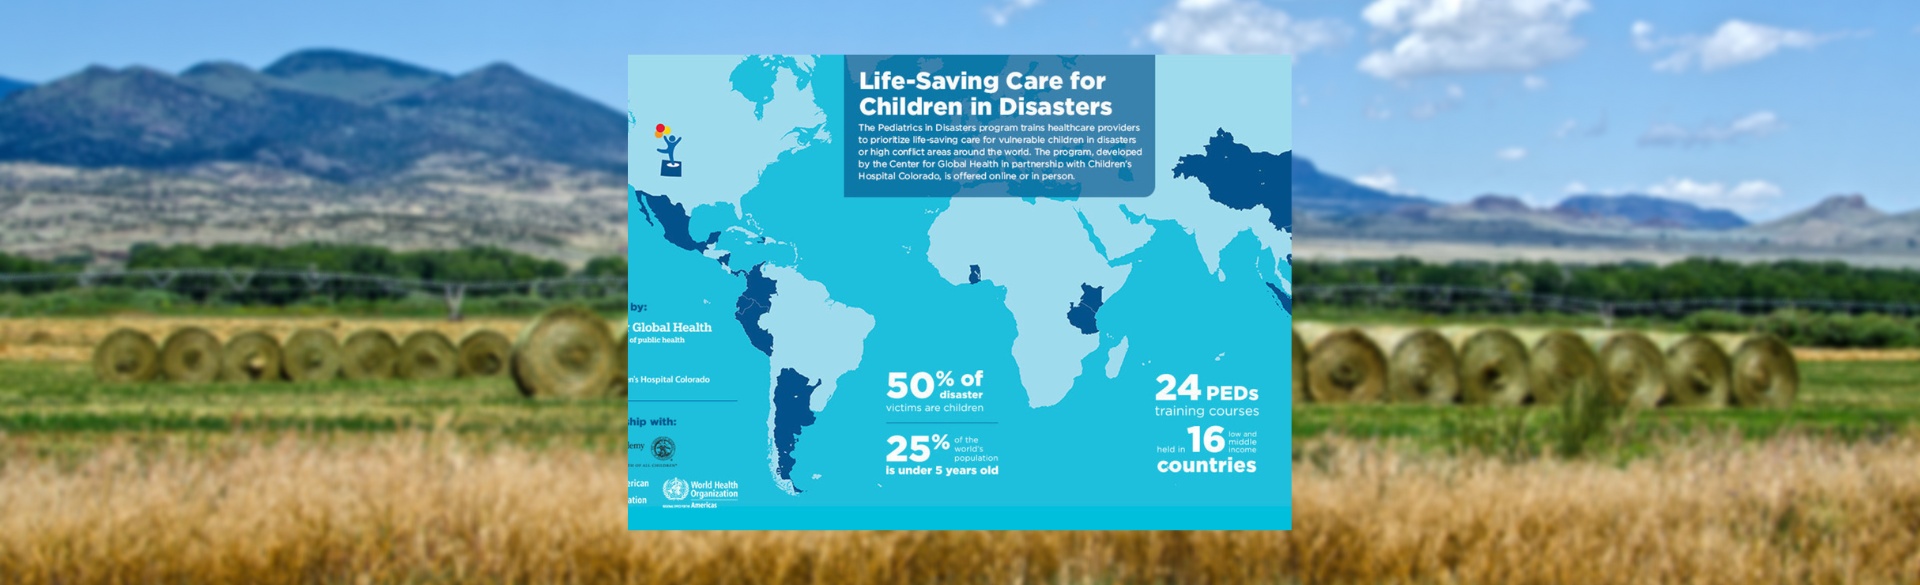 Life-saving care for children in disasters graphic on Colorado mountains